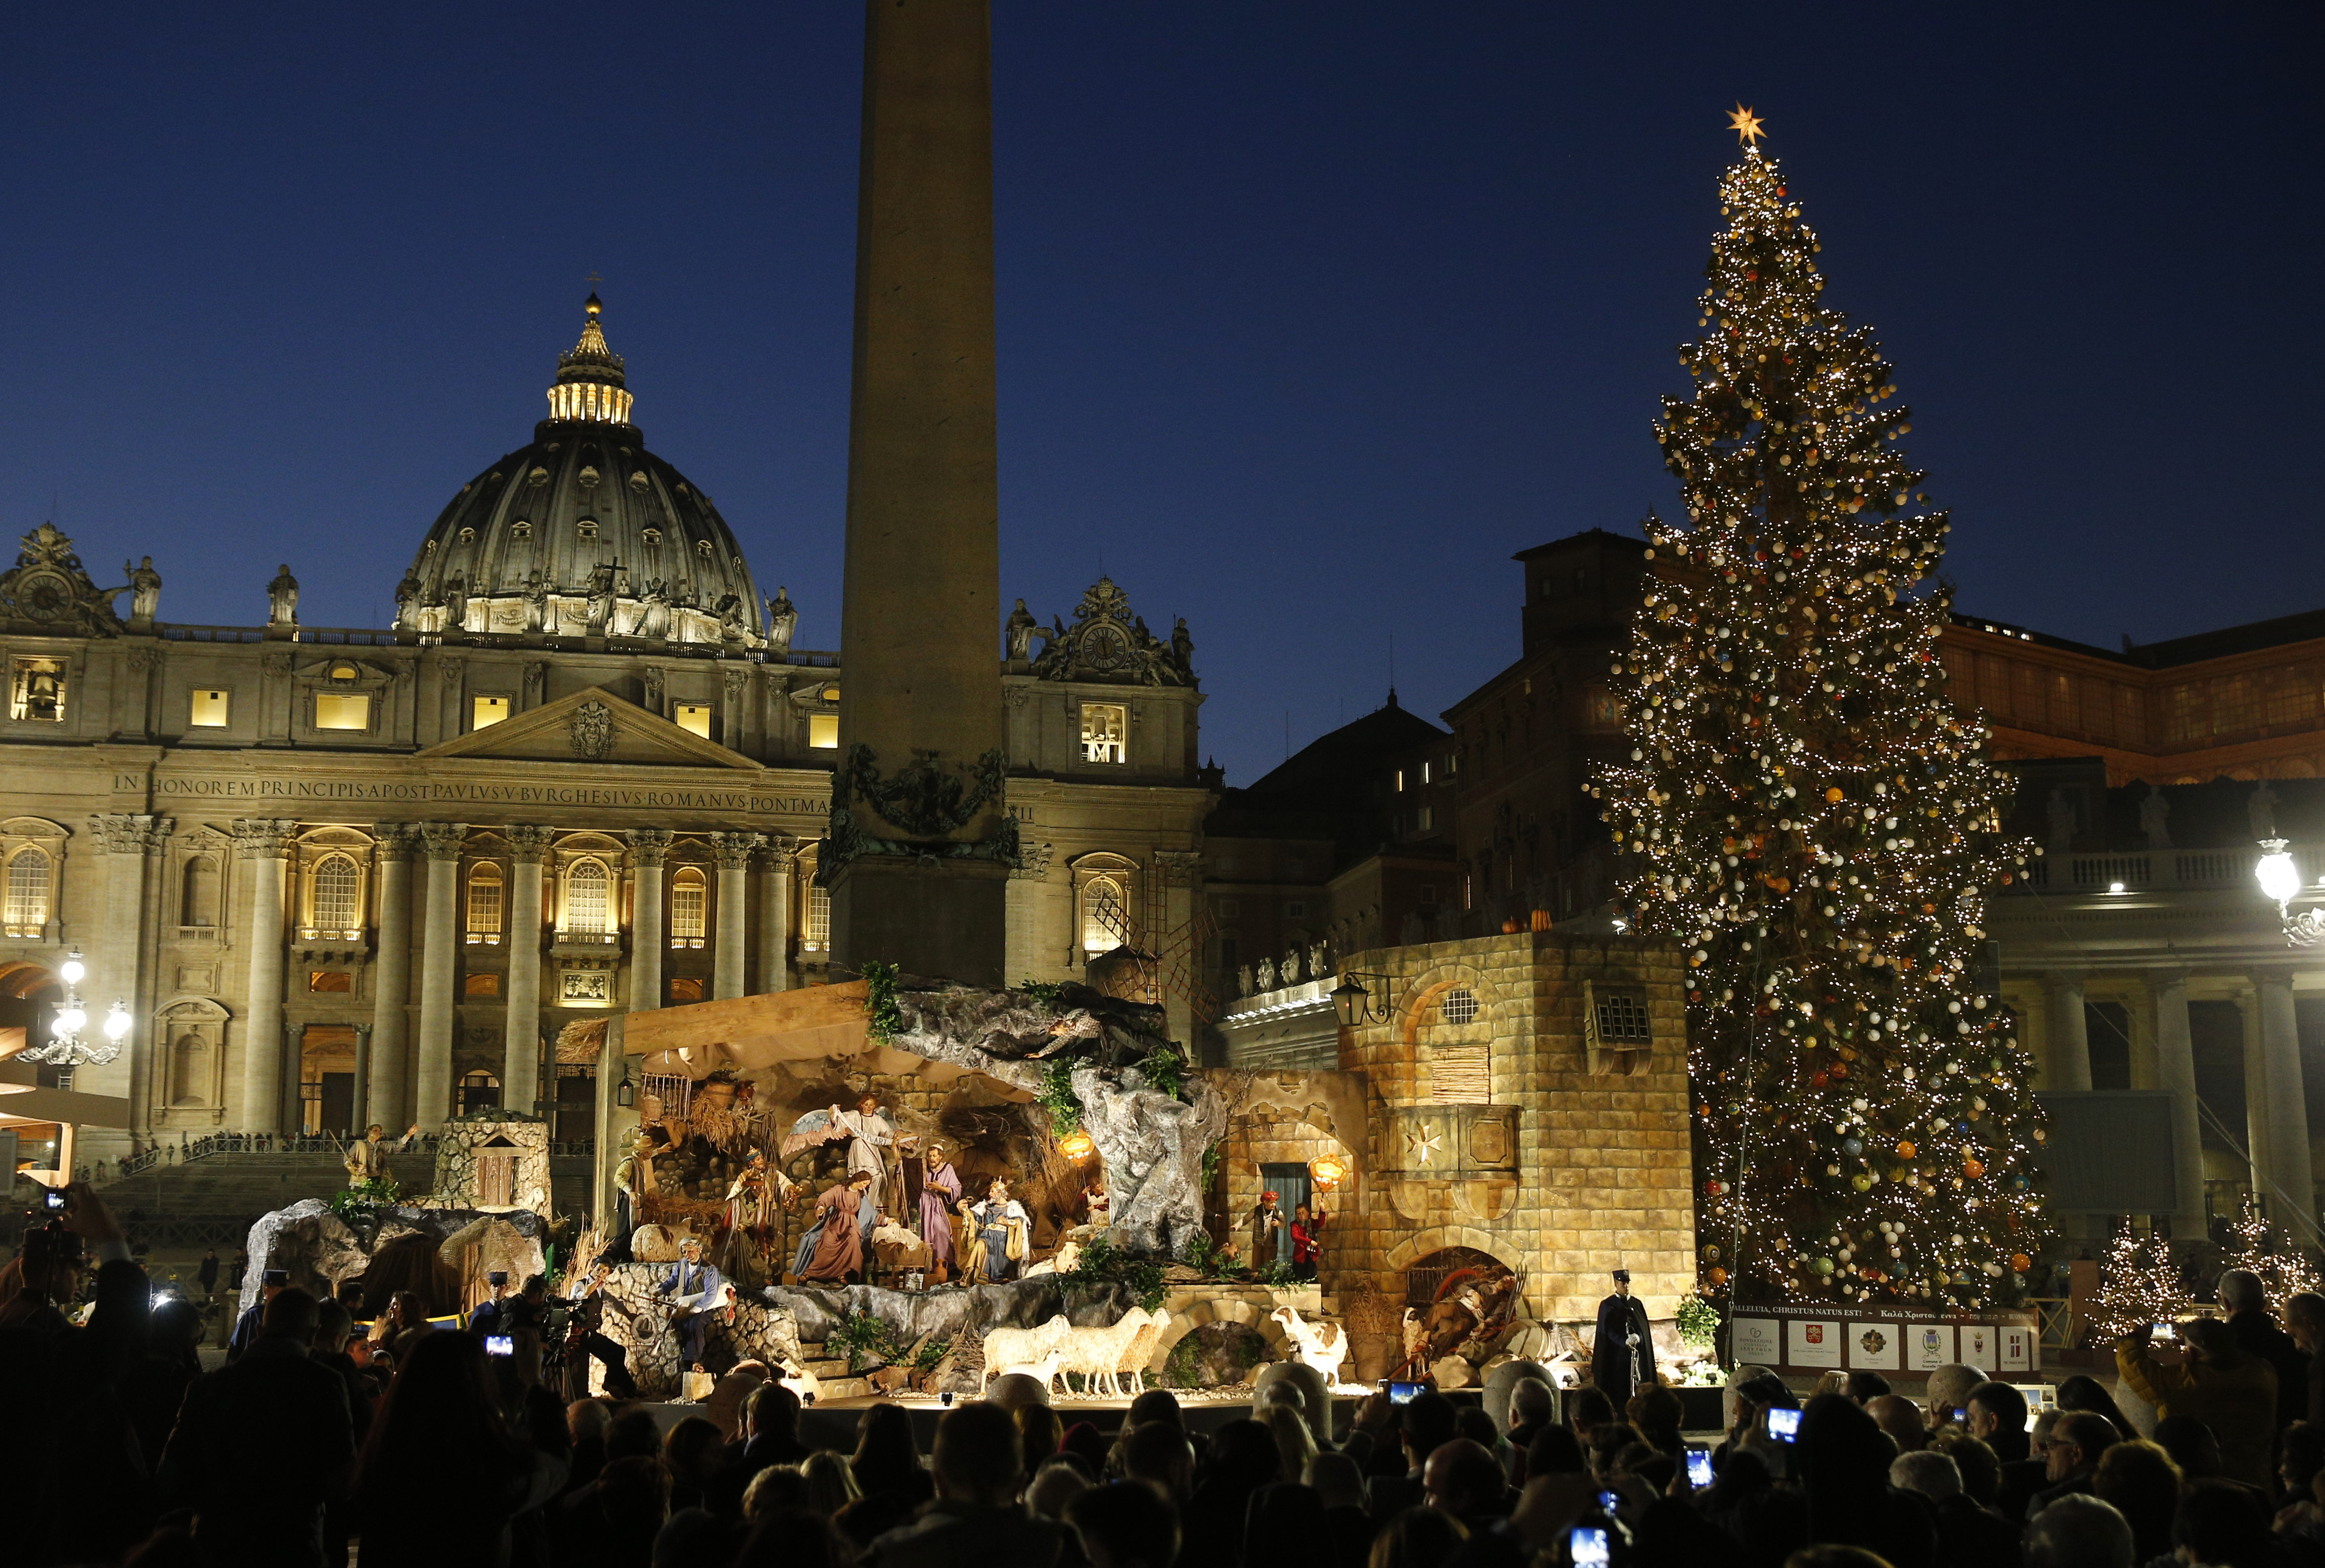 The Christmas tree and Nativity scene are pictured in St. Peter's Square after a lighting ceremony at the Vatican Dec. 9. (CNS photo/Paul Haring)